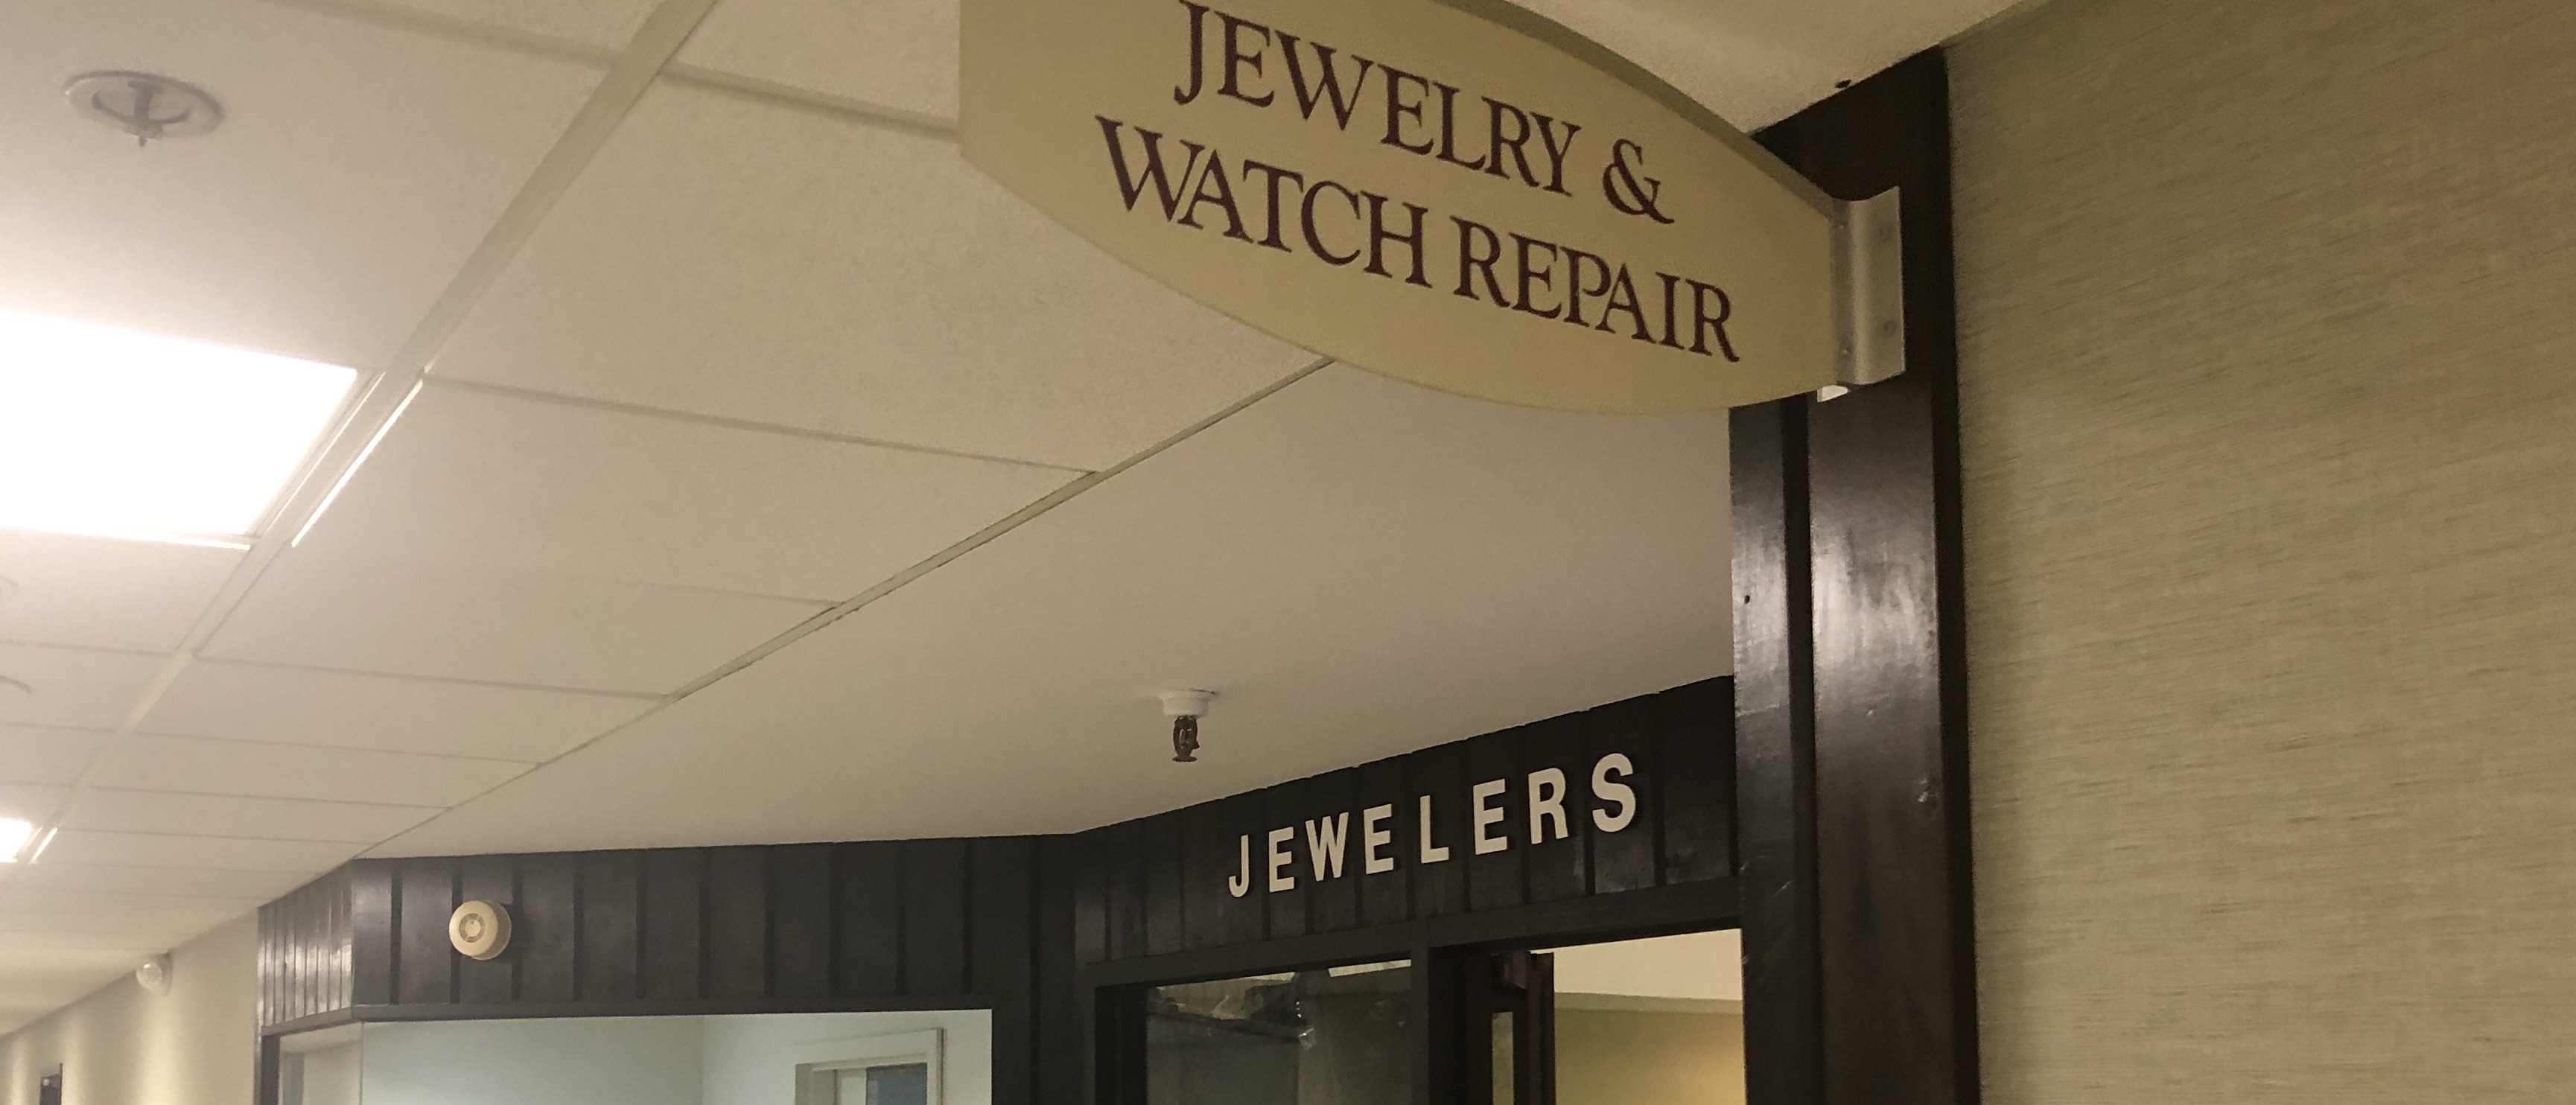 photo of the front of a watch & jewelry repair shop